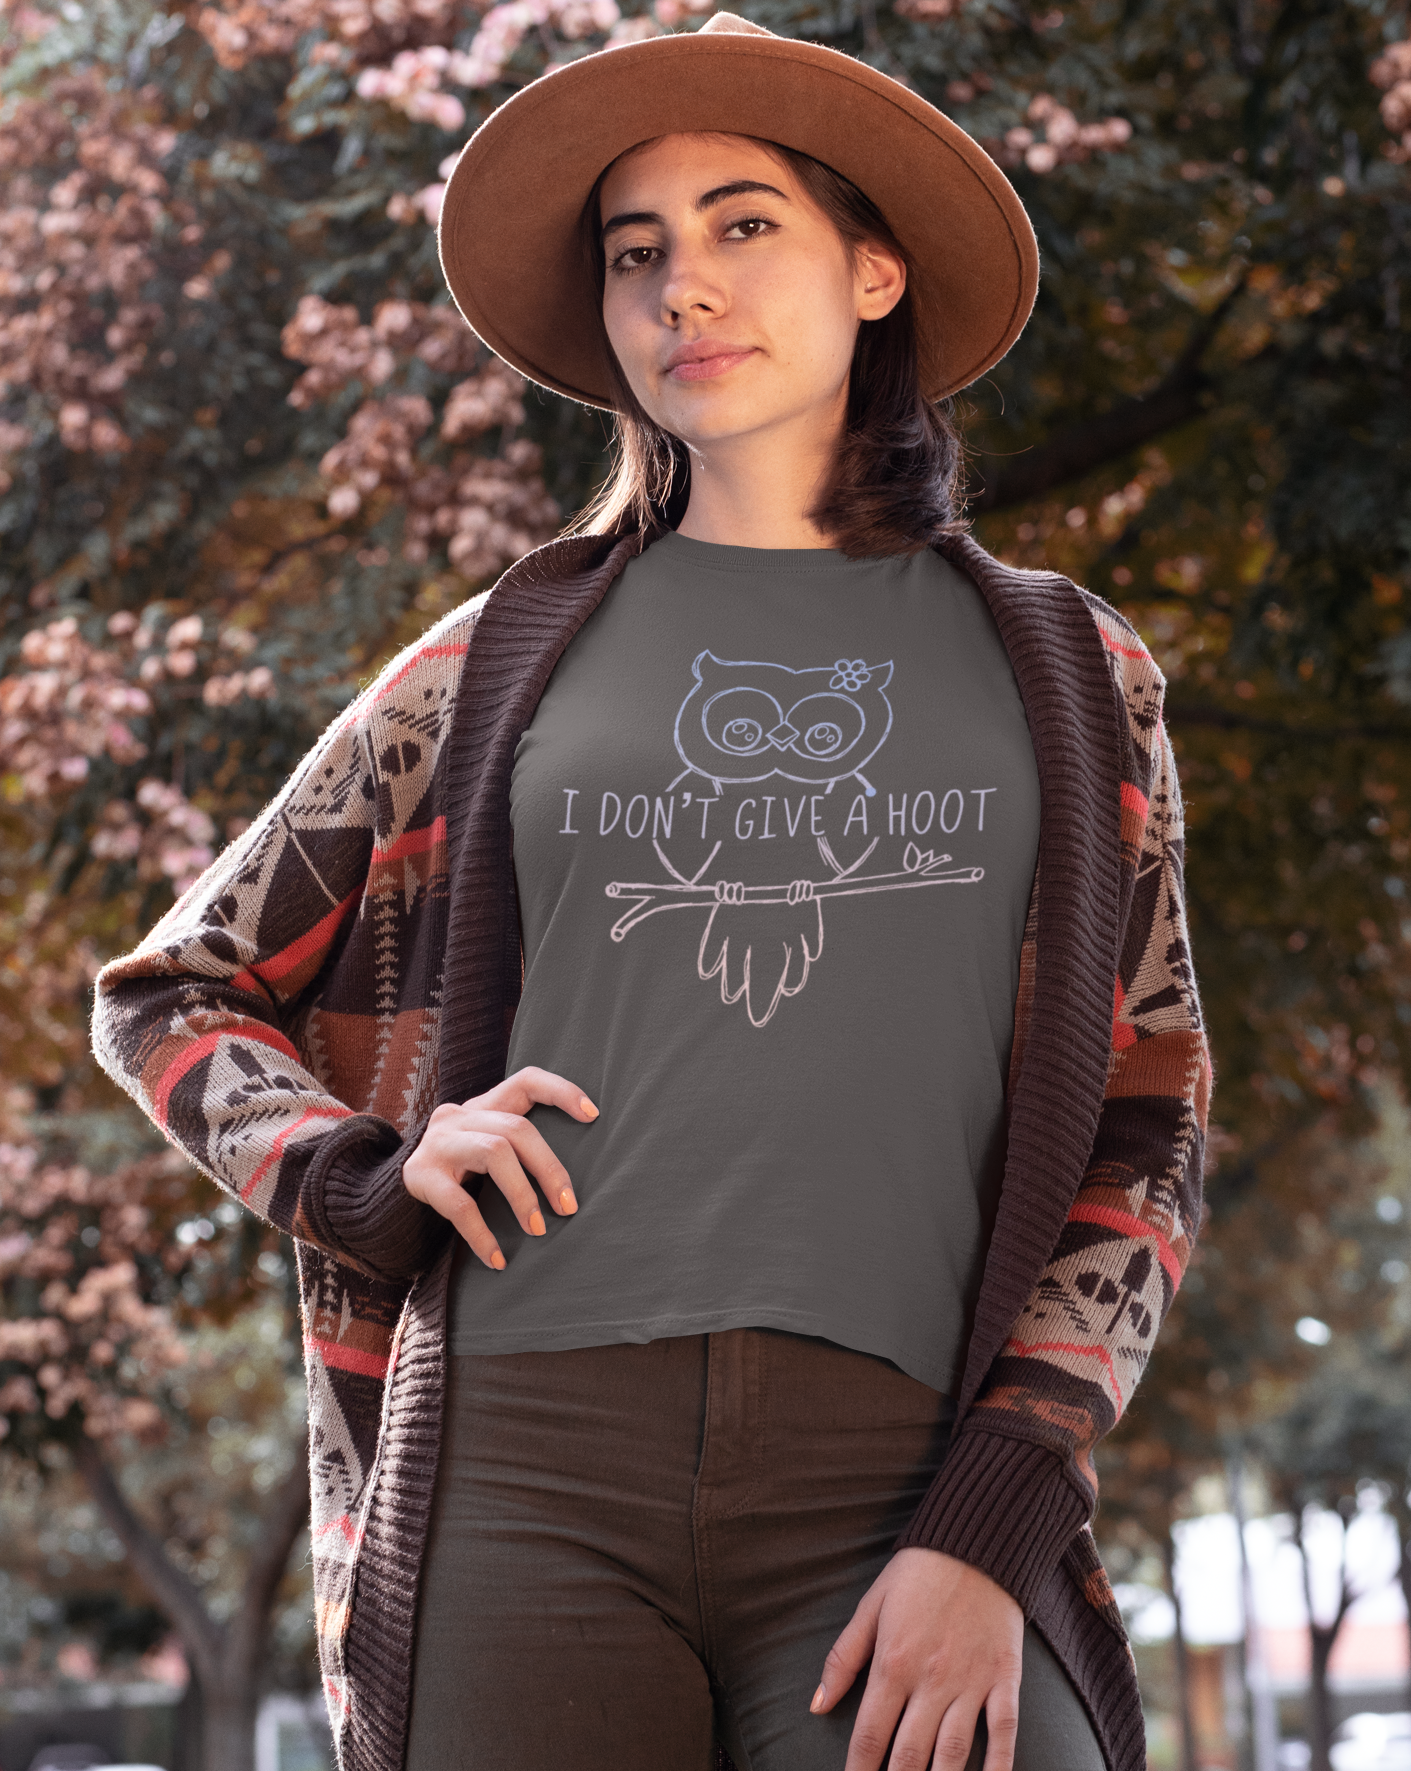 I Don't Give a Hoot! This funny cotton t-shirt is a great way to show your personal sense of humor and your love for cute owls! Also makes a perfect gift for that punny friend in your life!